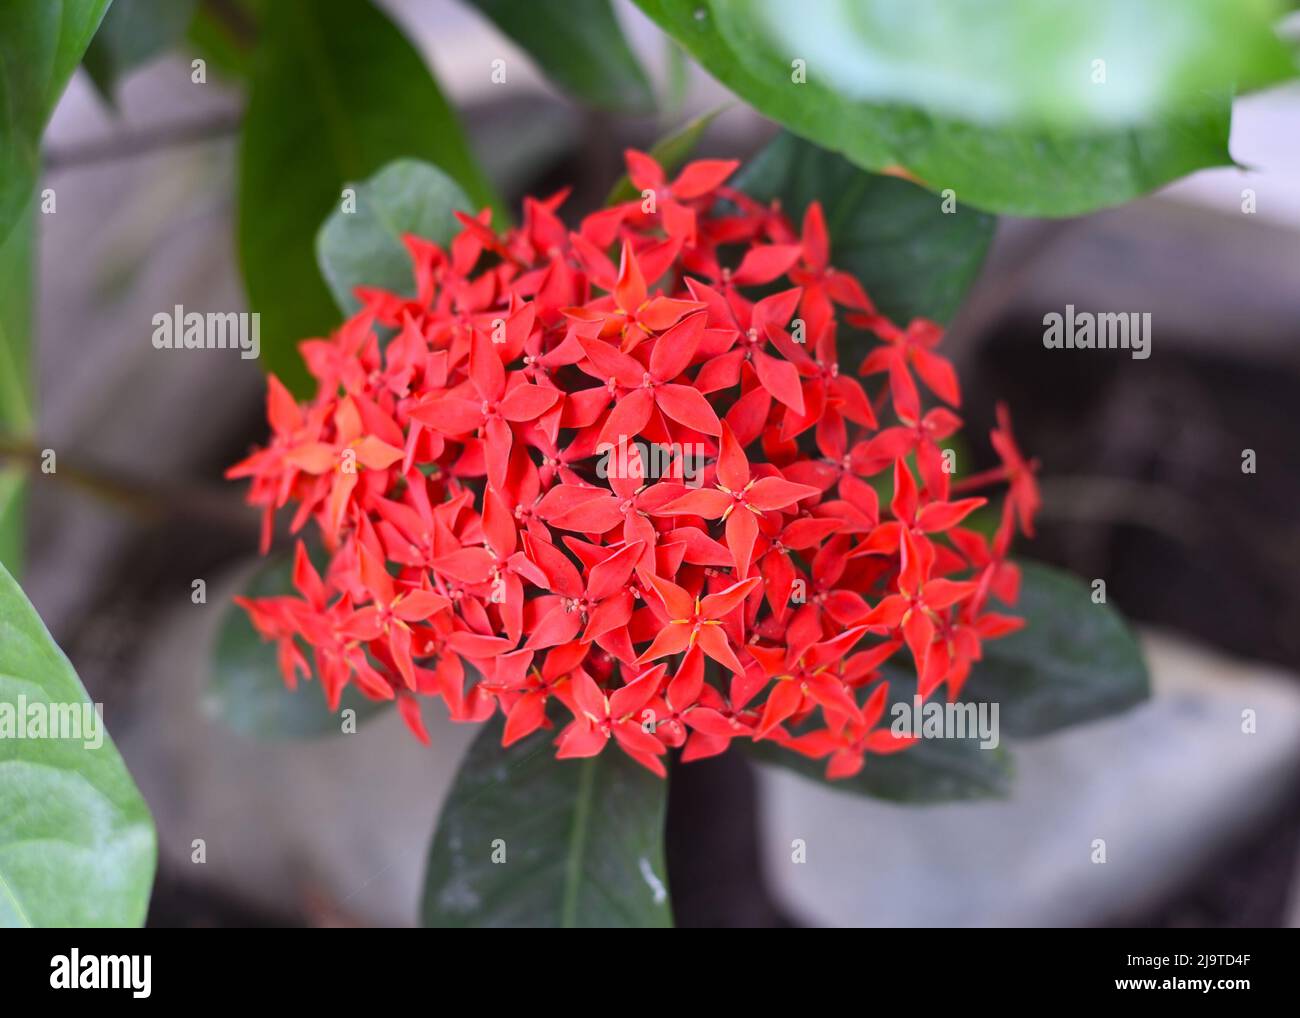 Ixora flower the west indian jasmine growing in Nha Trang Stock Photo